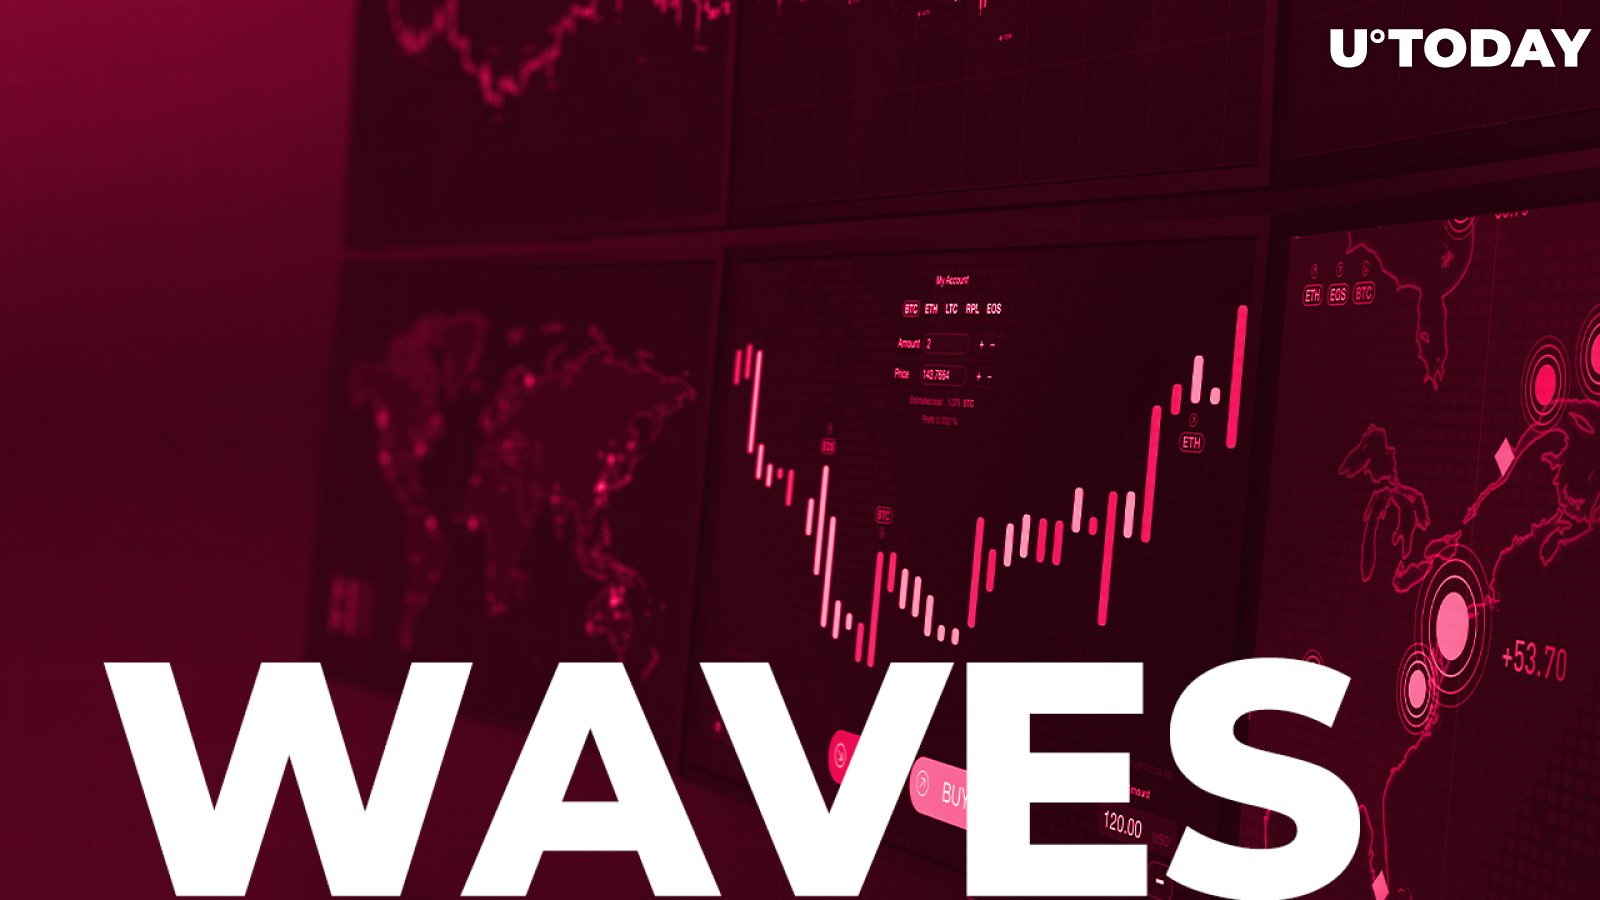 Crypto Scandal: WAVES's Stablecoin USDN De-Pegged and Fell to $0.85 Following Ponzi Scheme Accusations